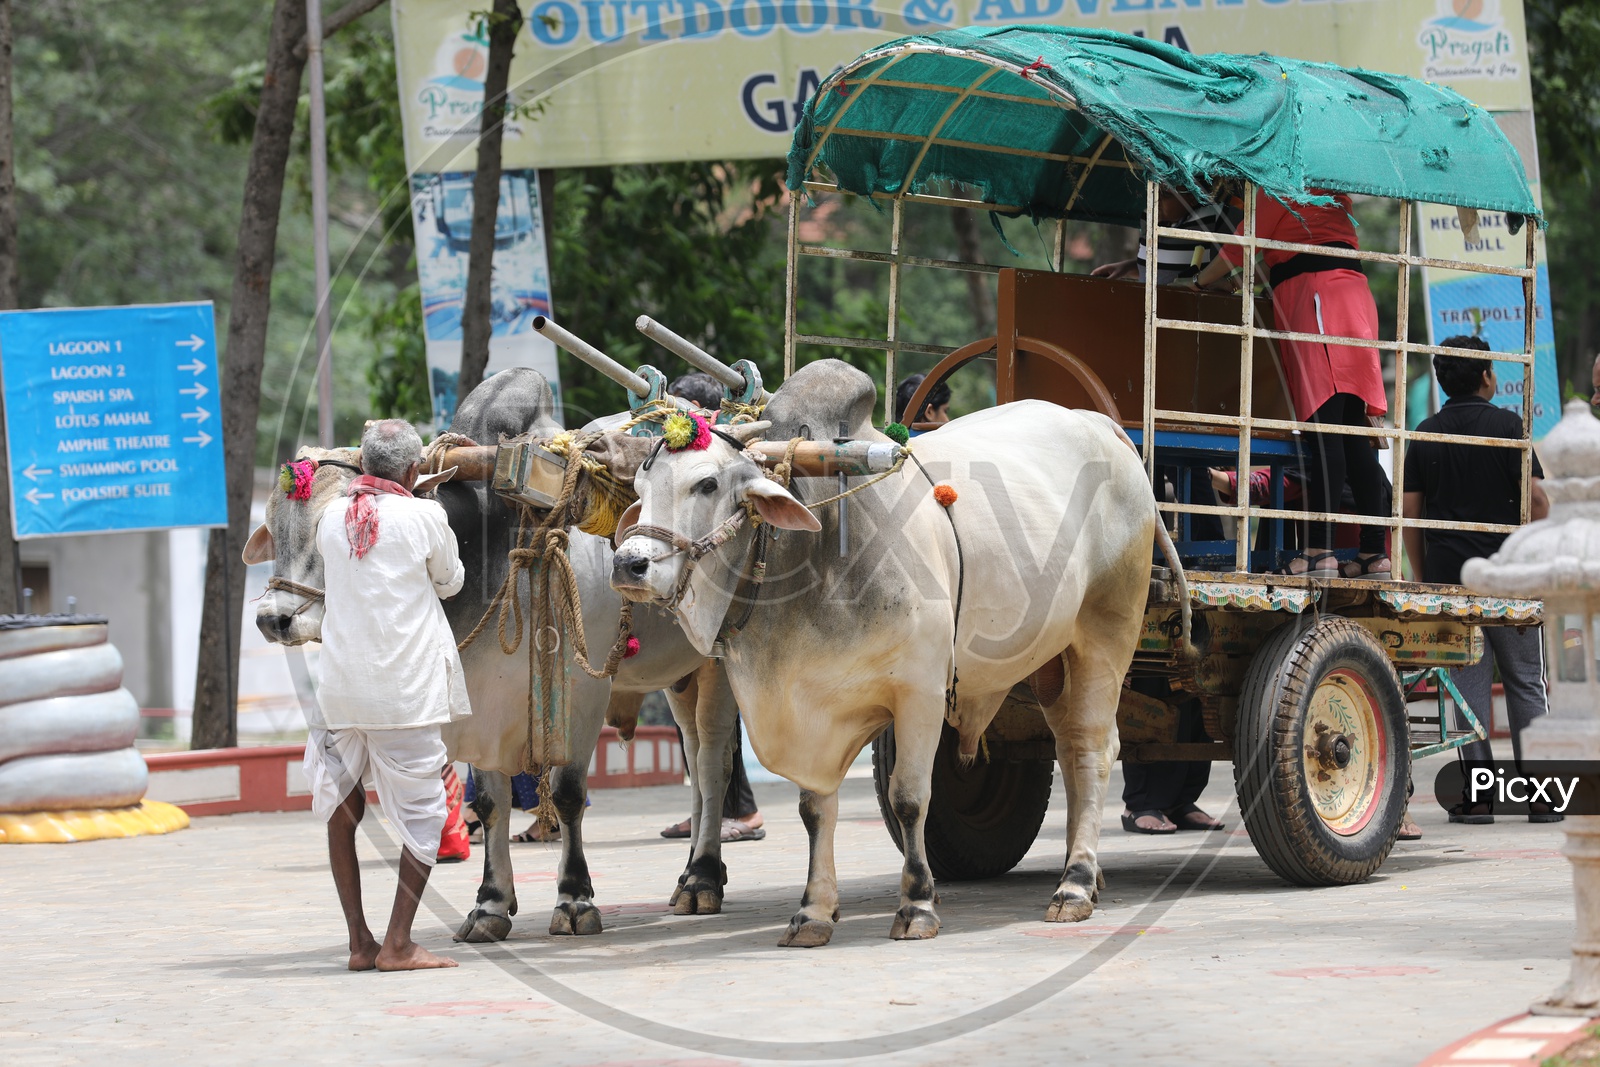 An Old Man With a Bullock Cart on roads